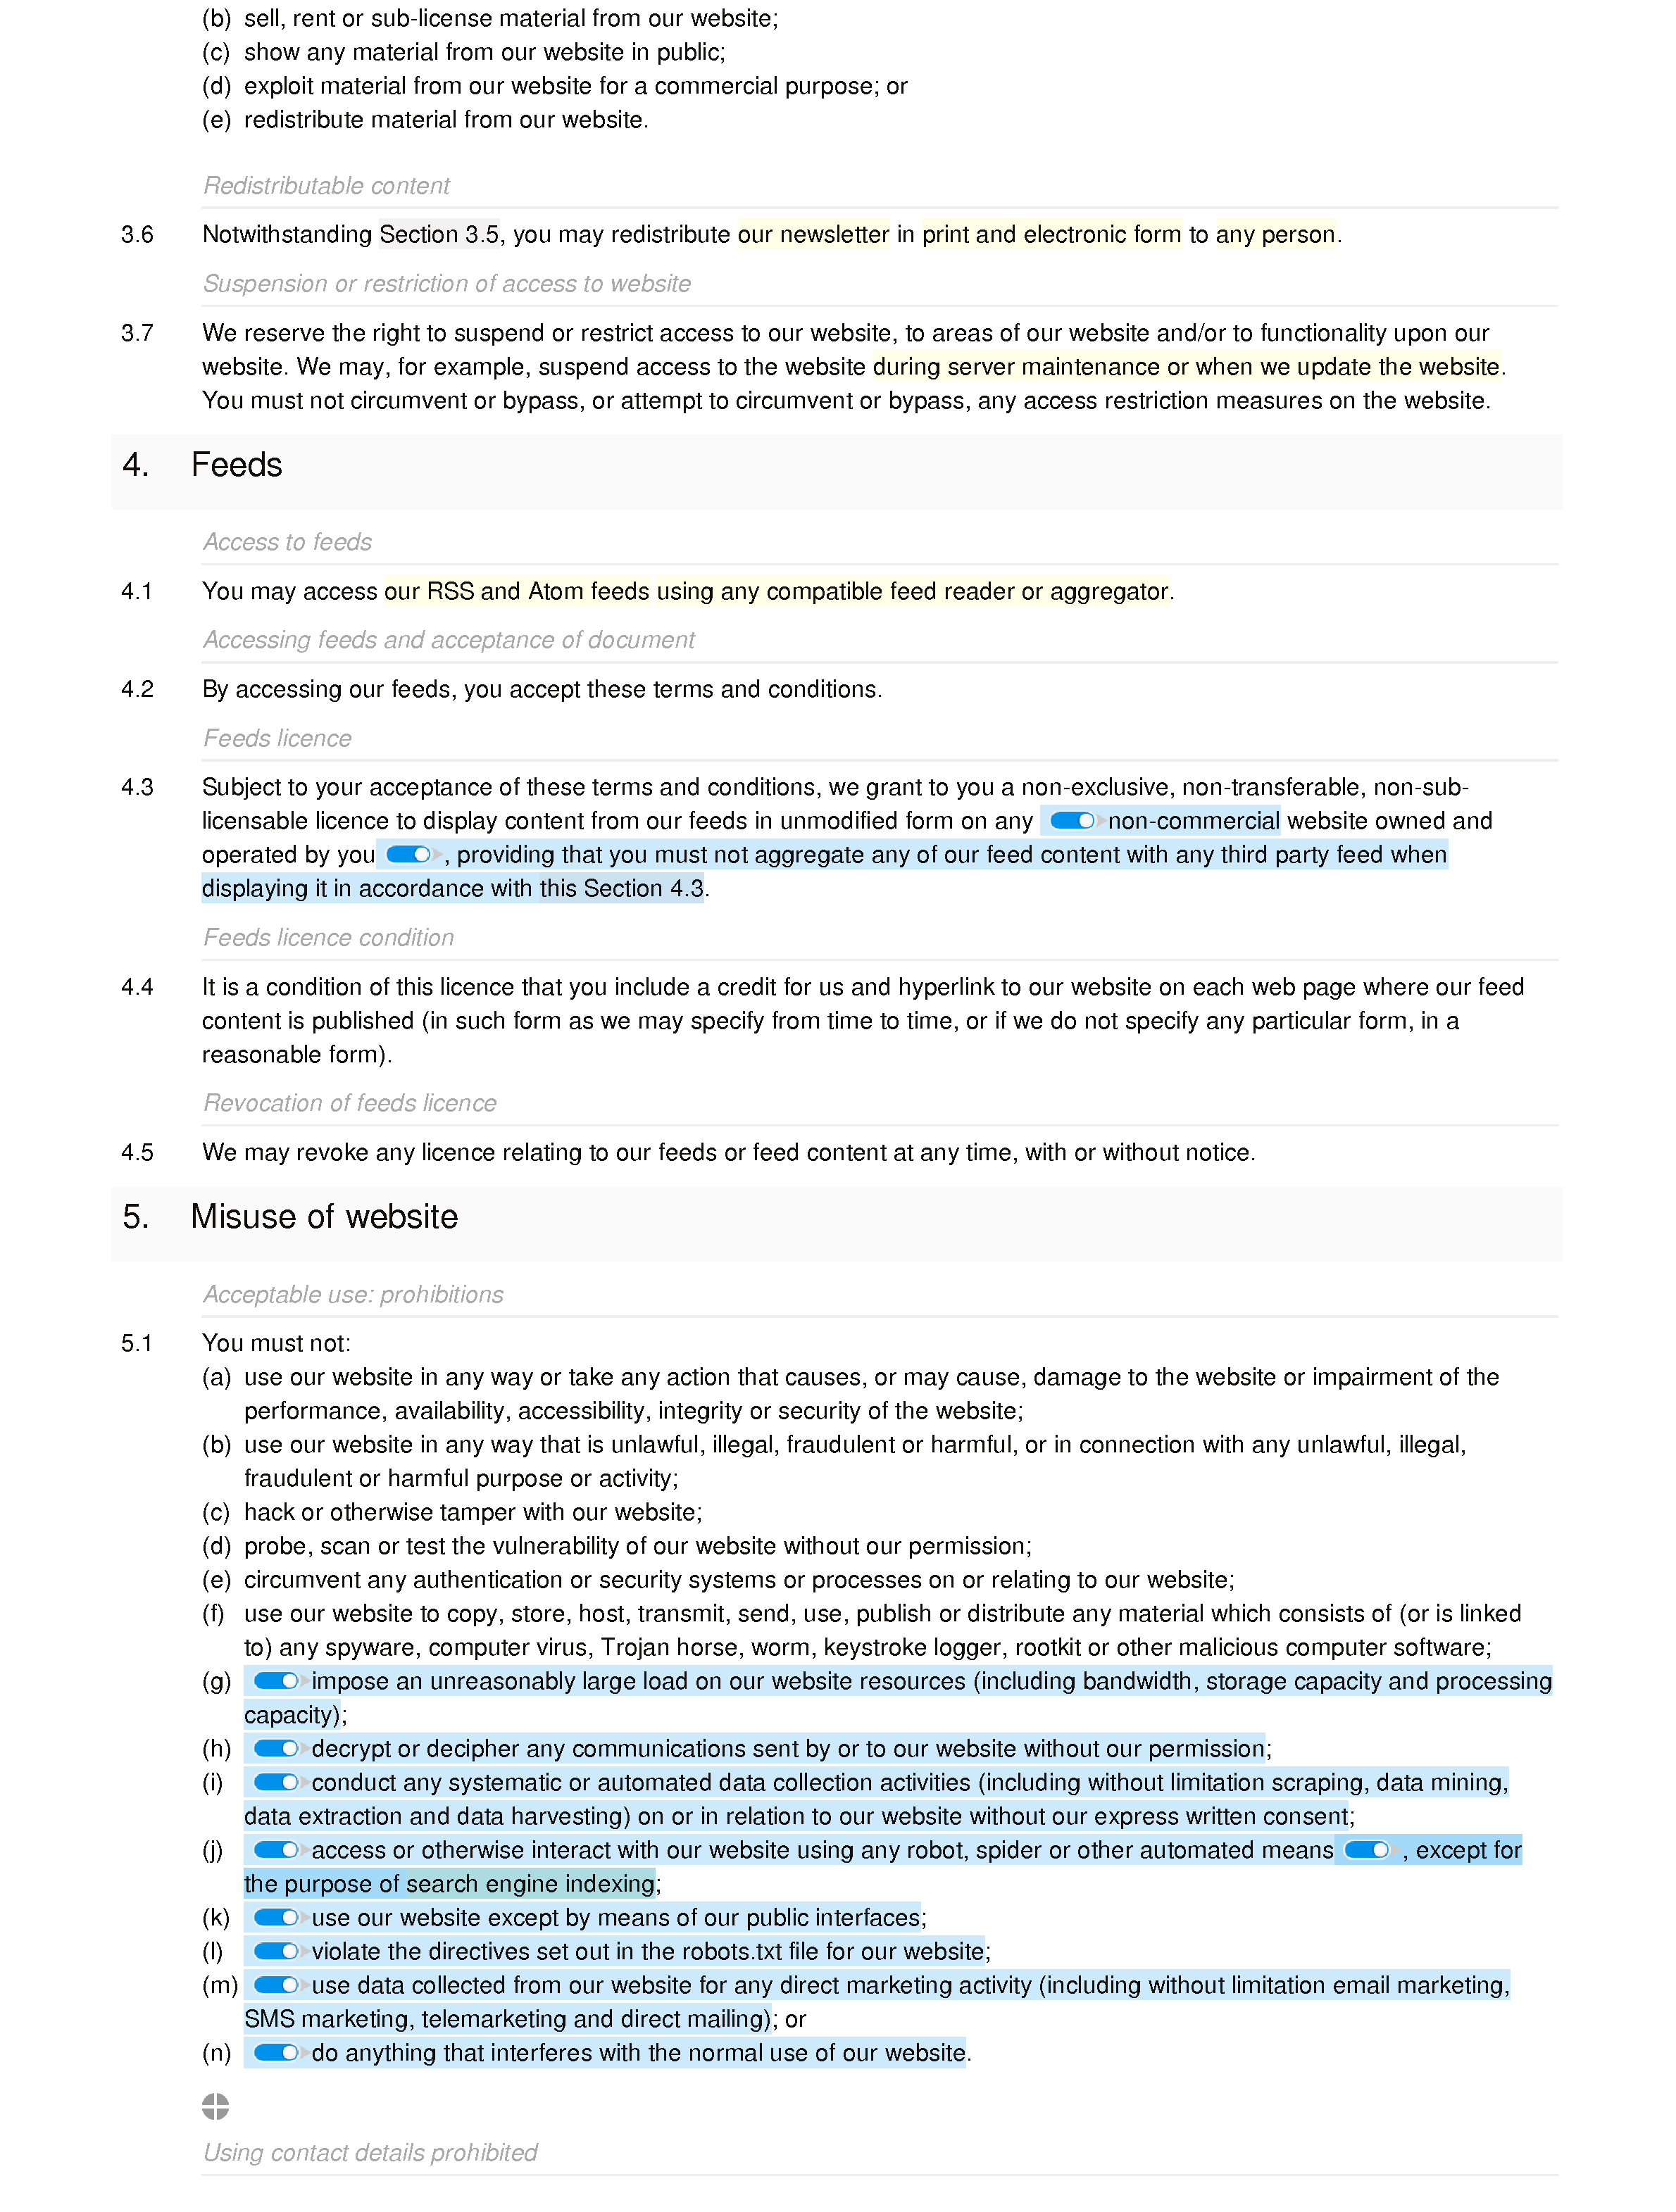 Legal website terms and conditions document editor preview